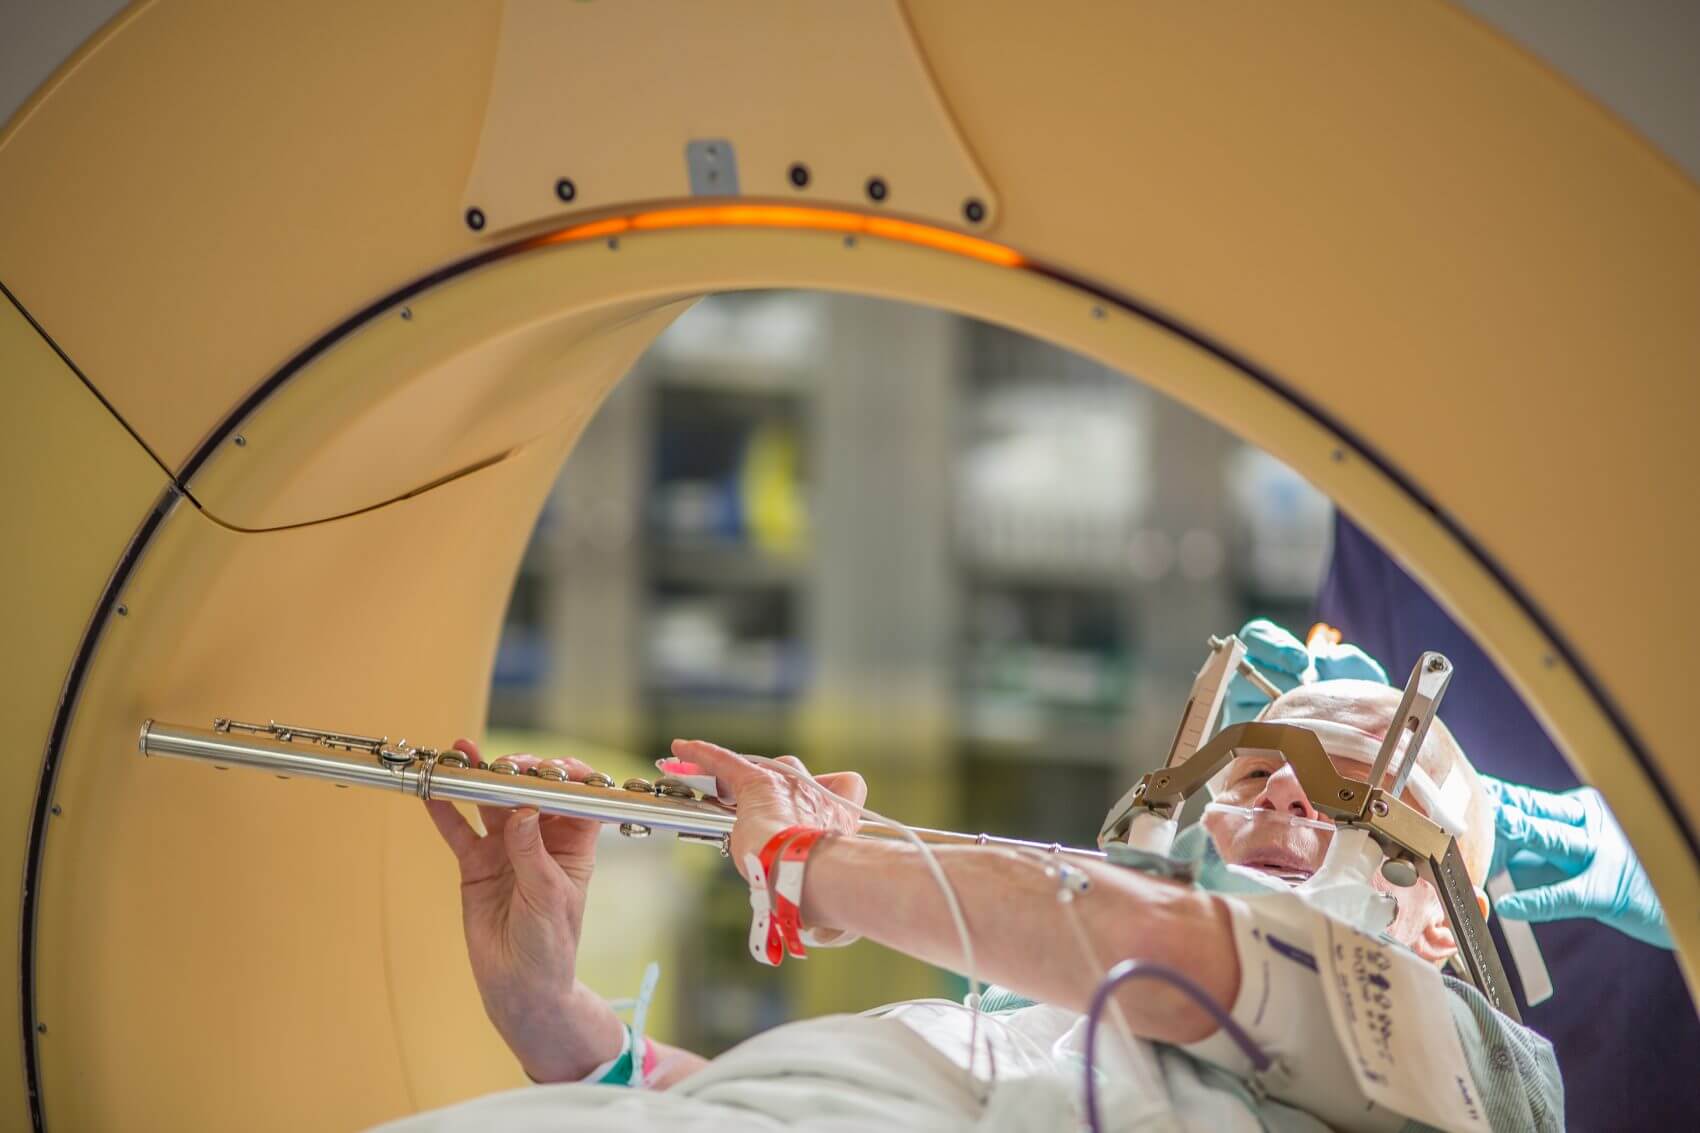 Deep brain stimulation patient Anna Henry plays the flute in the operating room bed.